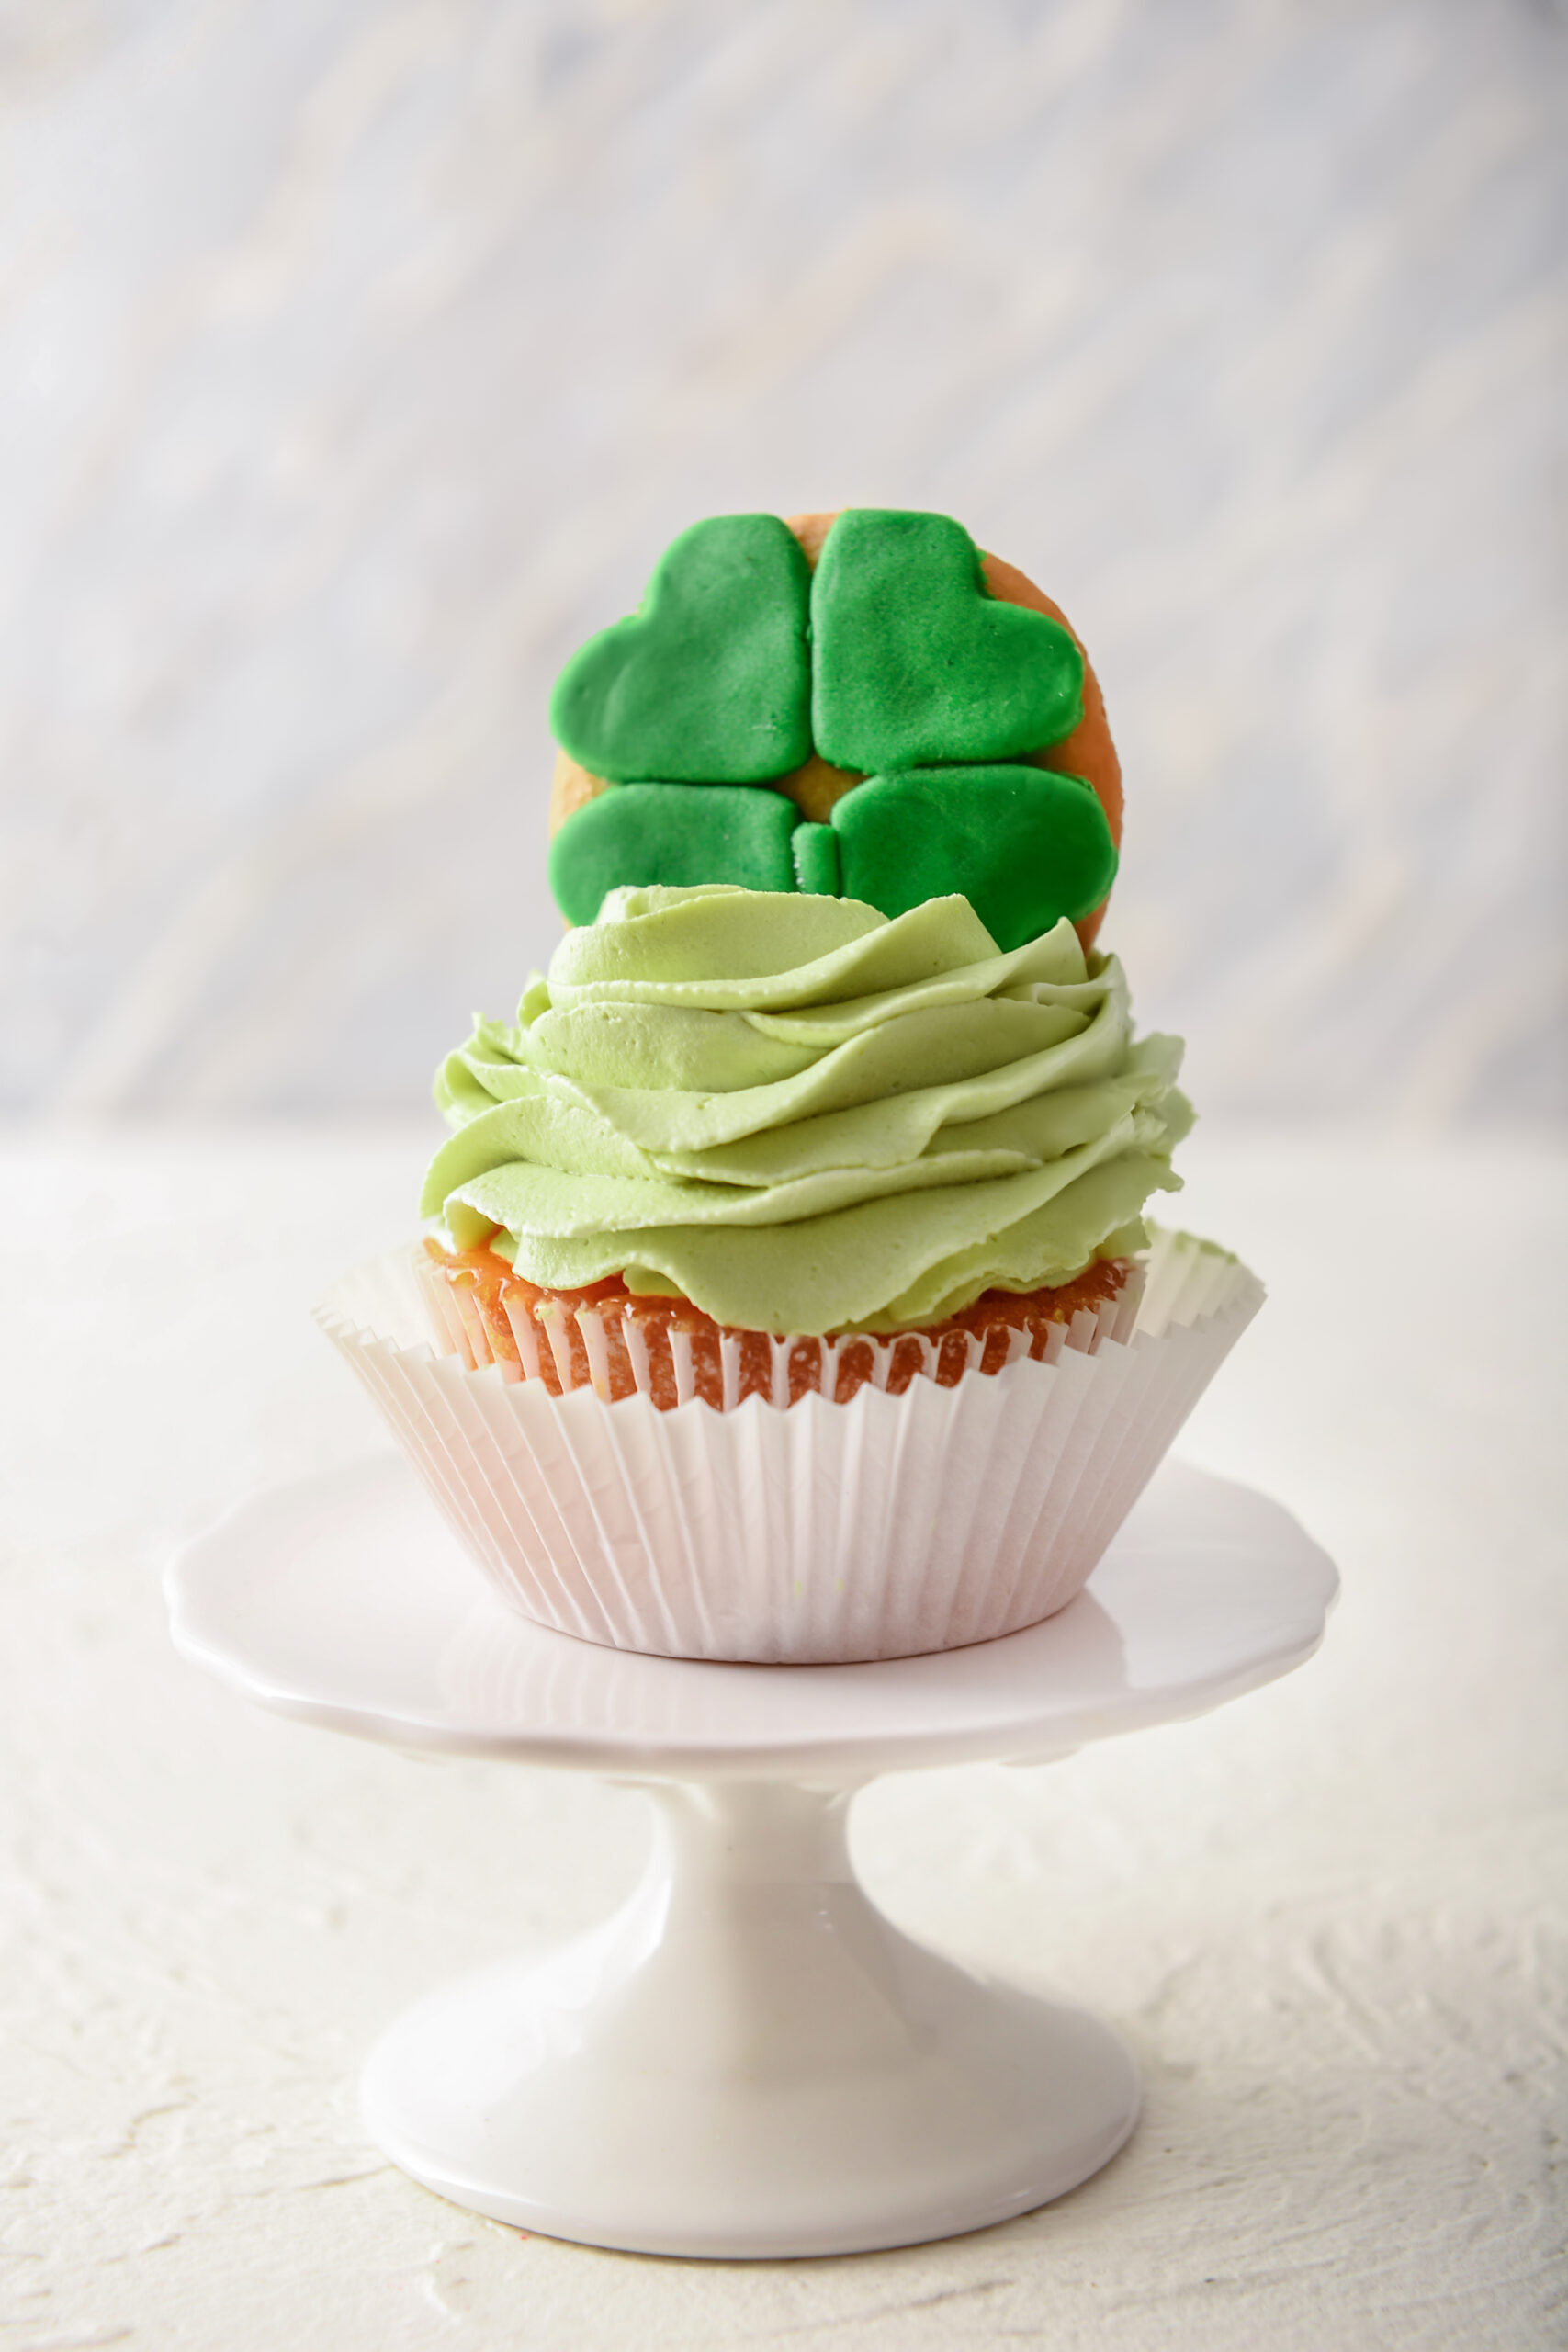 Tasty cupcake for St. Patrick's Day celebration on white table - Top 10 St. Patrick's Day Dessert Recipes; St. Patrick's day recipes for desserts along with other green recipes for this Irish holiday!